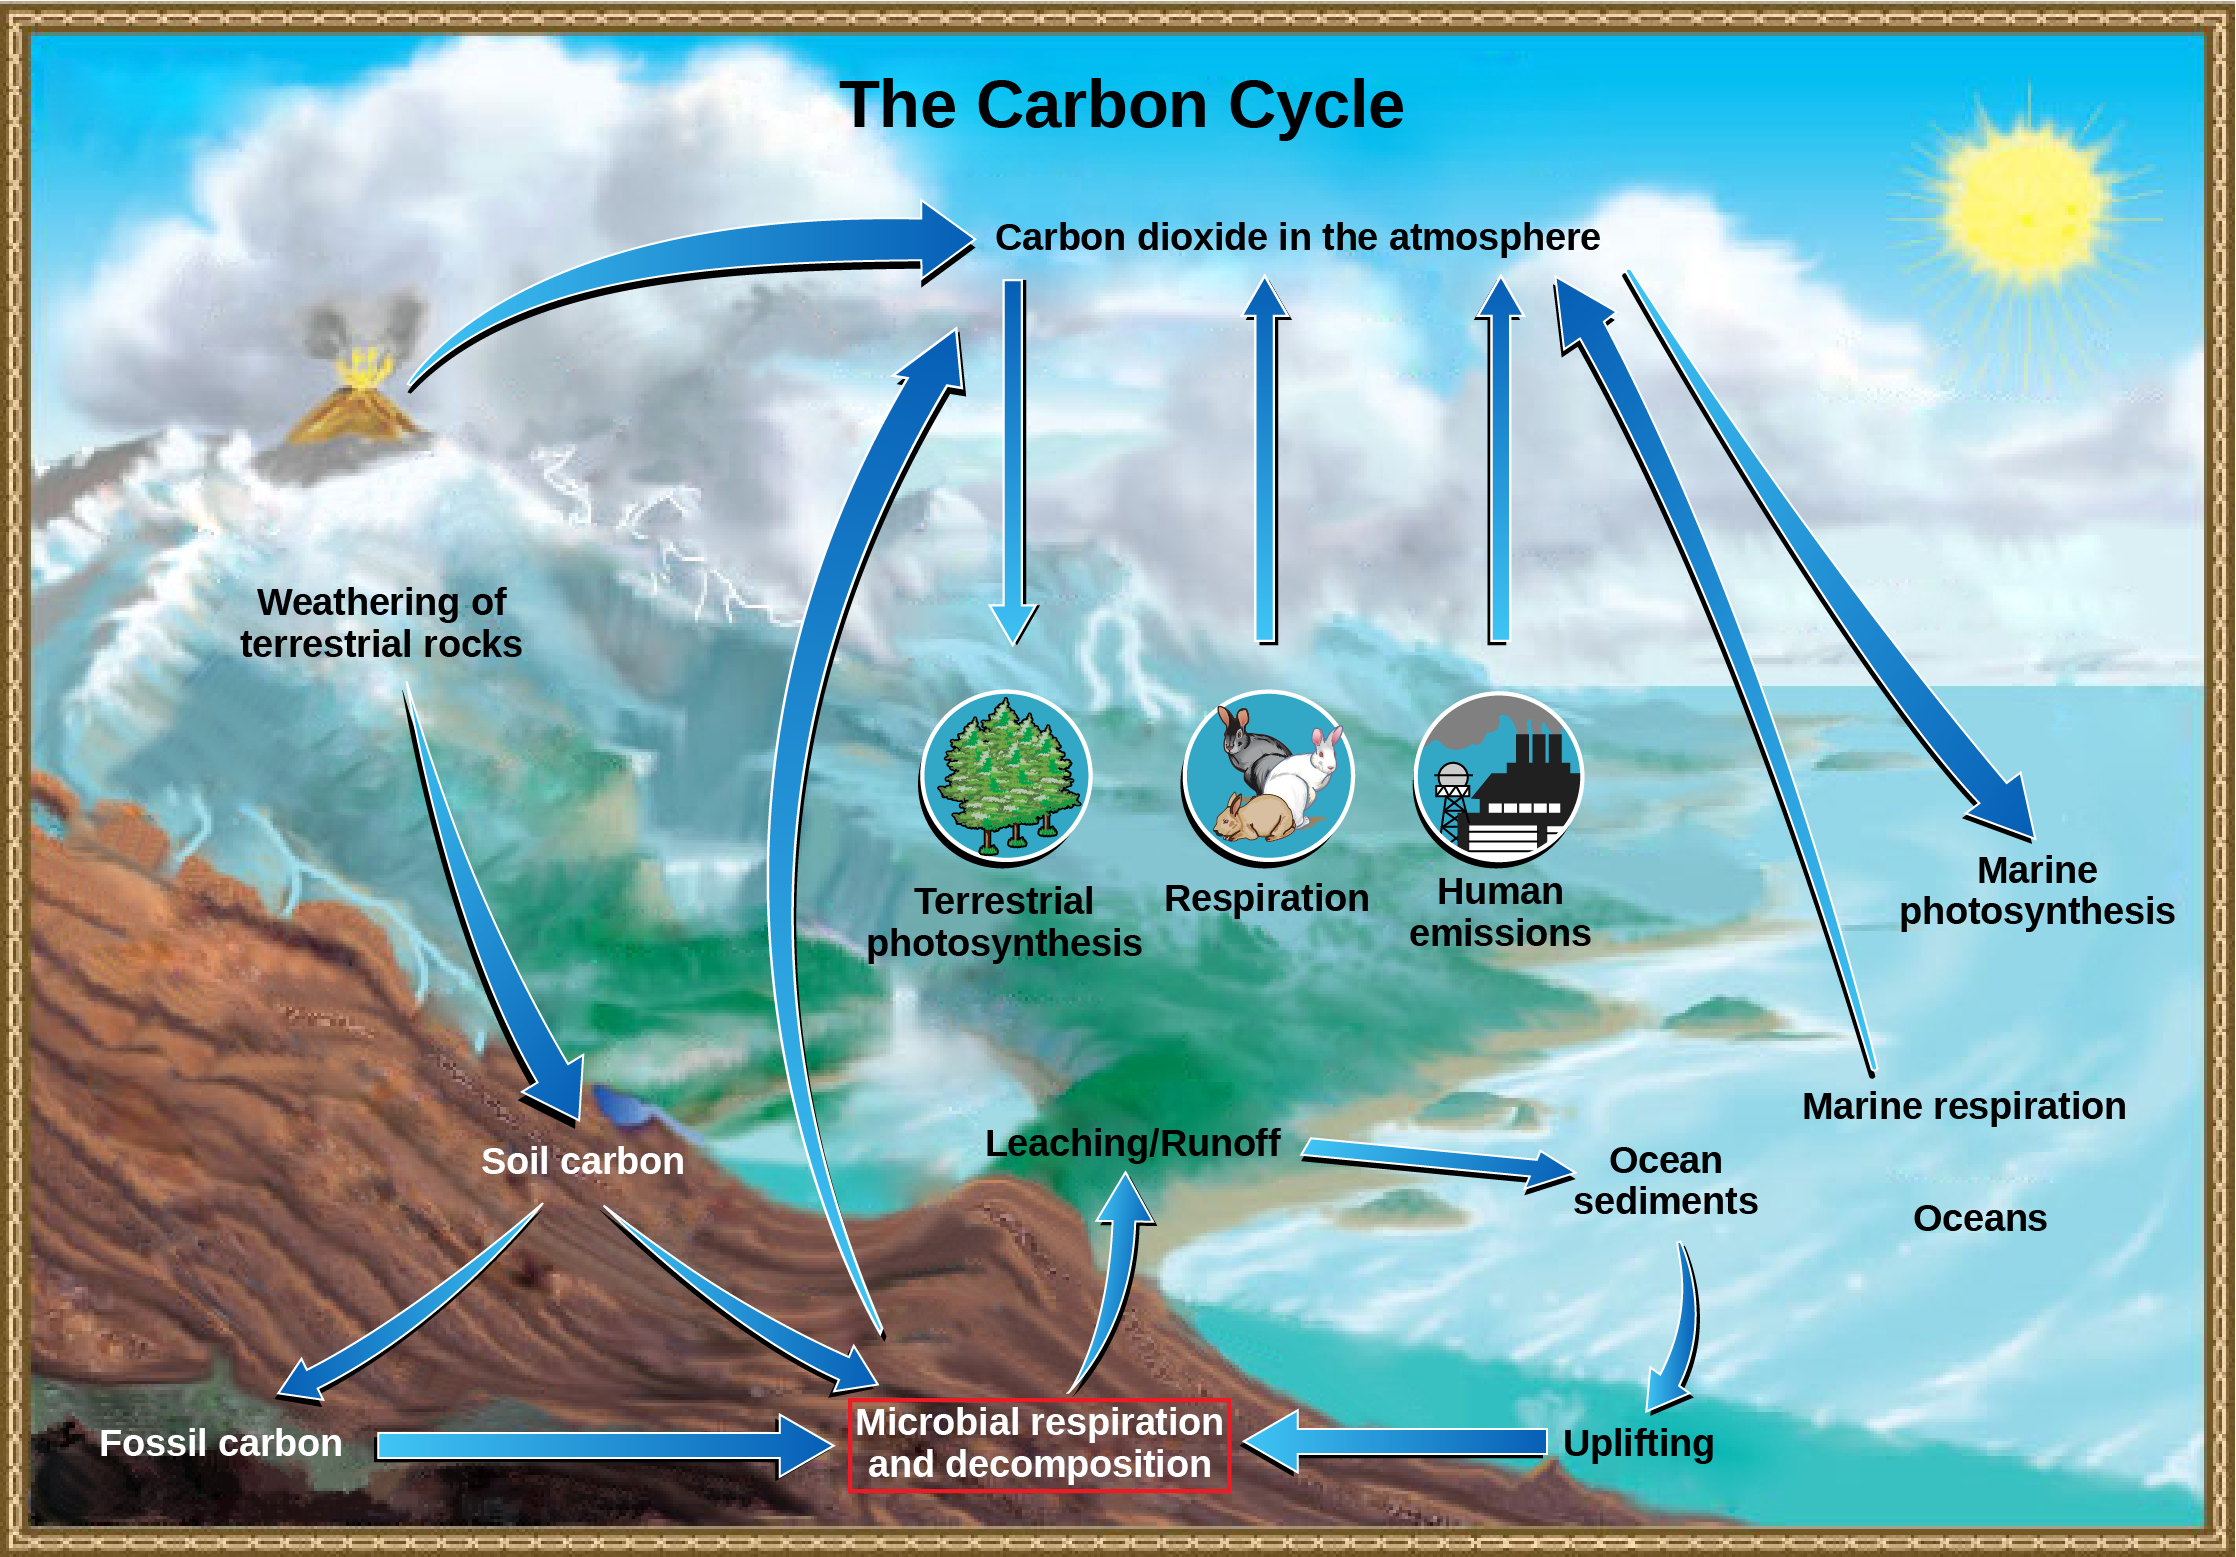 An illustration shows the carbon lifecycle.  Carbon dioxide in the atmosphere occurs by way of volcanic eruptions, animal, microbial and marine respiration, and human emissions - such as from factories.  It is absorbed by terrestrial photosynthesis from plants, and marine photosynthesis.  The weathering of terrestrial rocks turns into soil carbon, which then branches into either fossil carbon, or microbial respiration and decomposition; fossil carbon also contributes to this.  This decomposition has a leaching, or runoff effect, and enters the ocean as sediments.